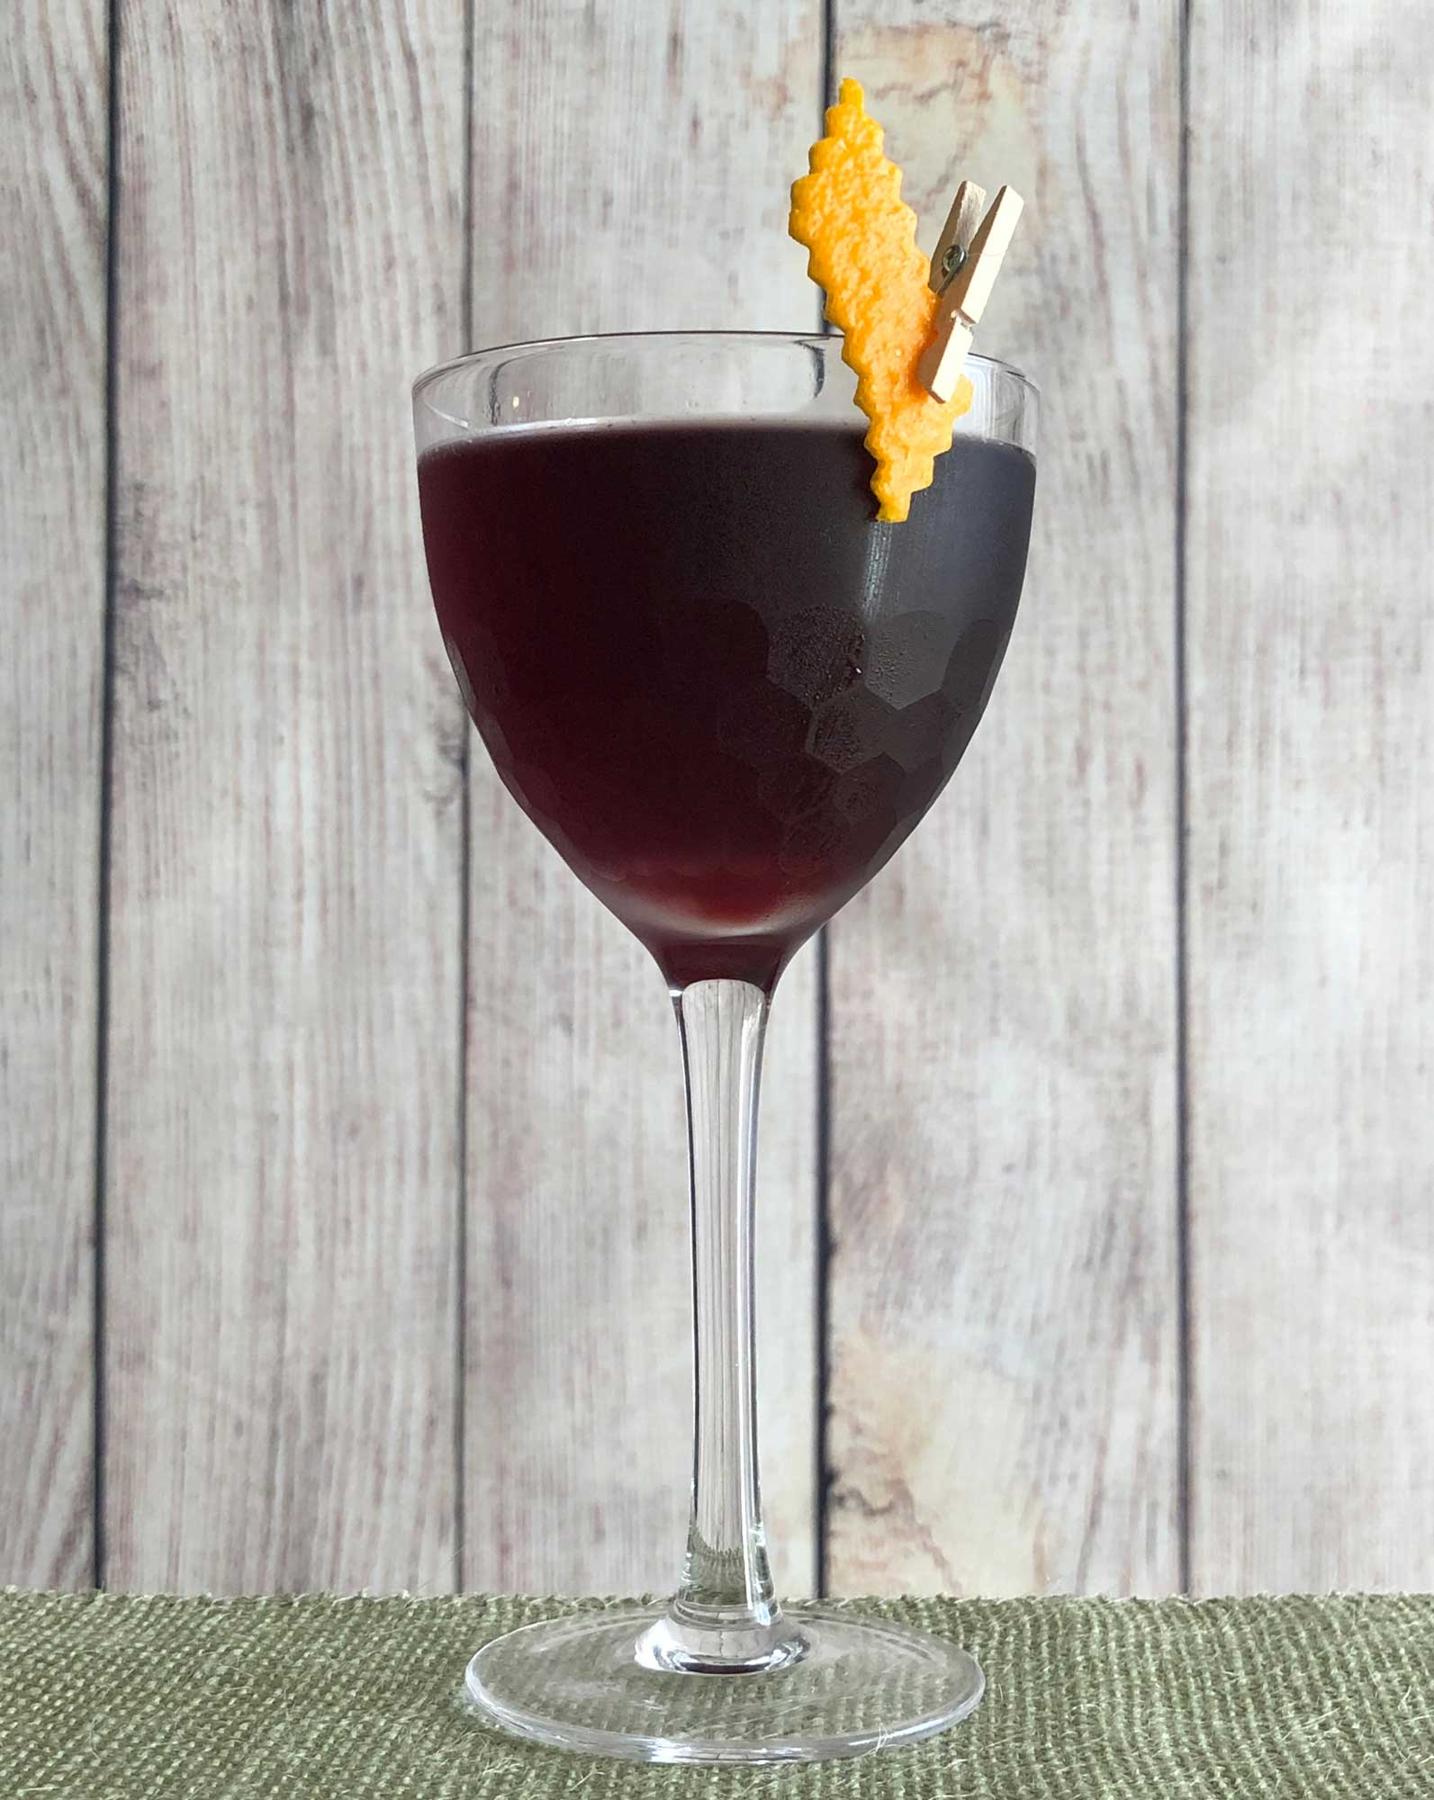 An example of the Aunt Cathy’s Old Time Potion, the mixed drink (drink) featuring dry red wine, Averell Damson Plum Gin Liqueur, Campari, orange bitters, Fee Brothers Black Walnut Bitters, Fee Brothers Cardamom Bitters (Boker’s Style), and orange twist; photo by Lee Edwards